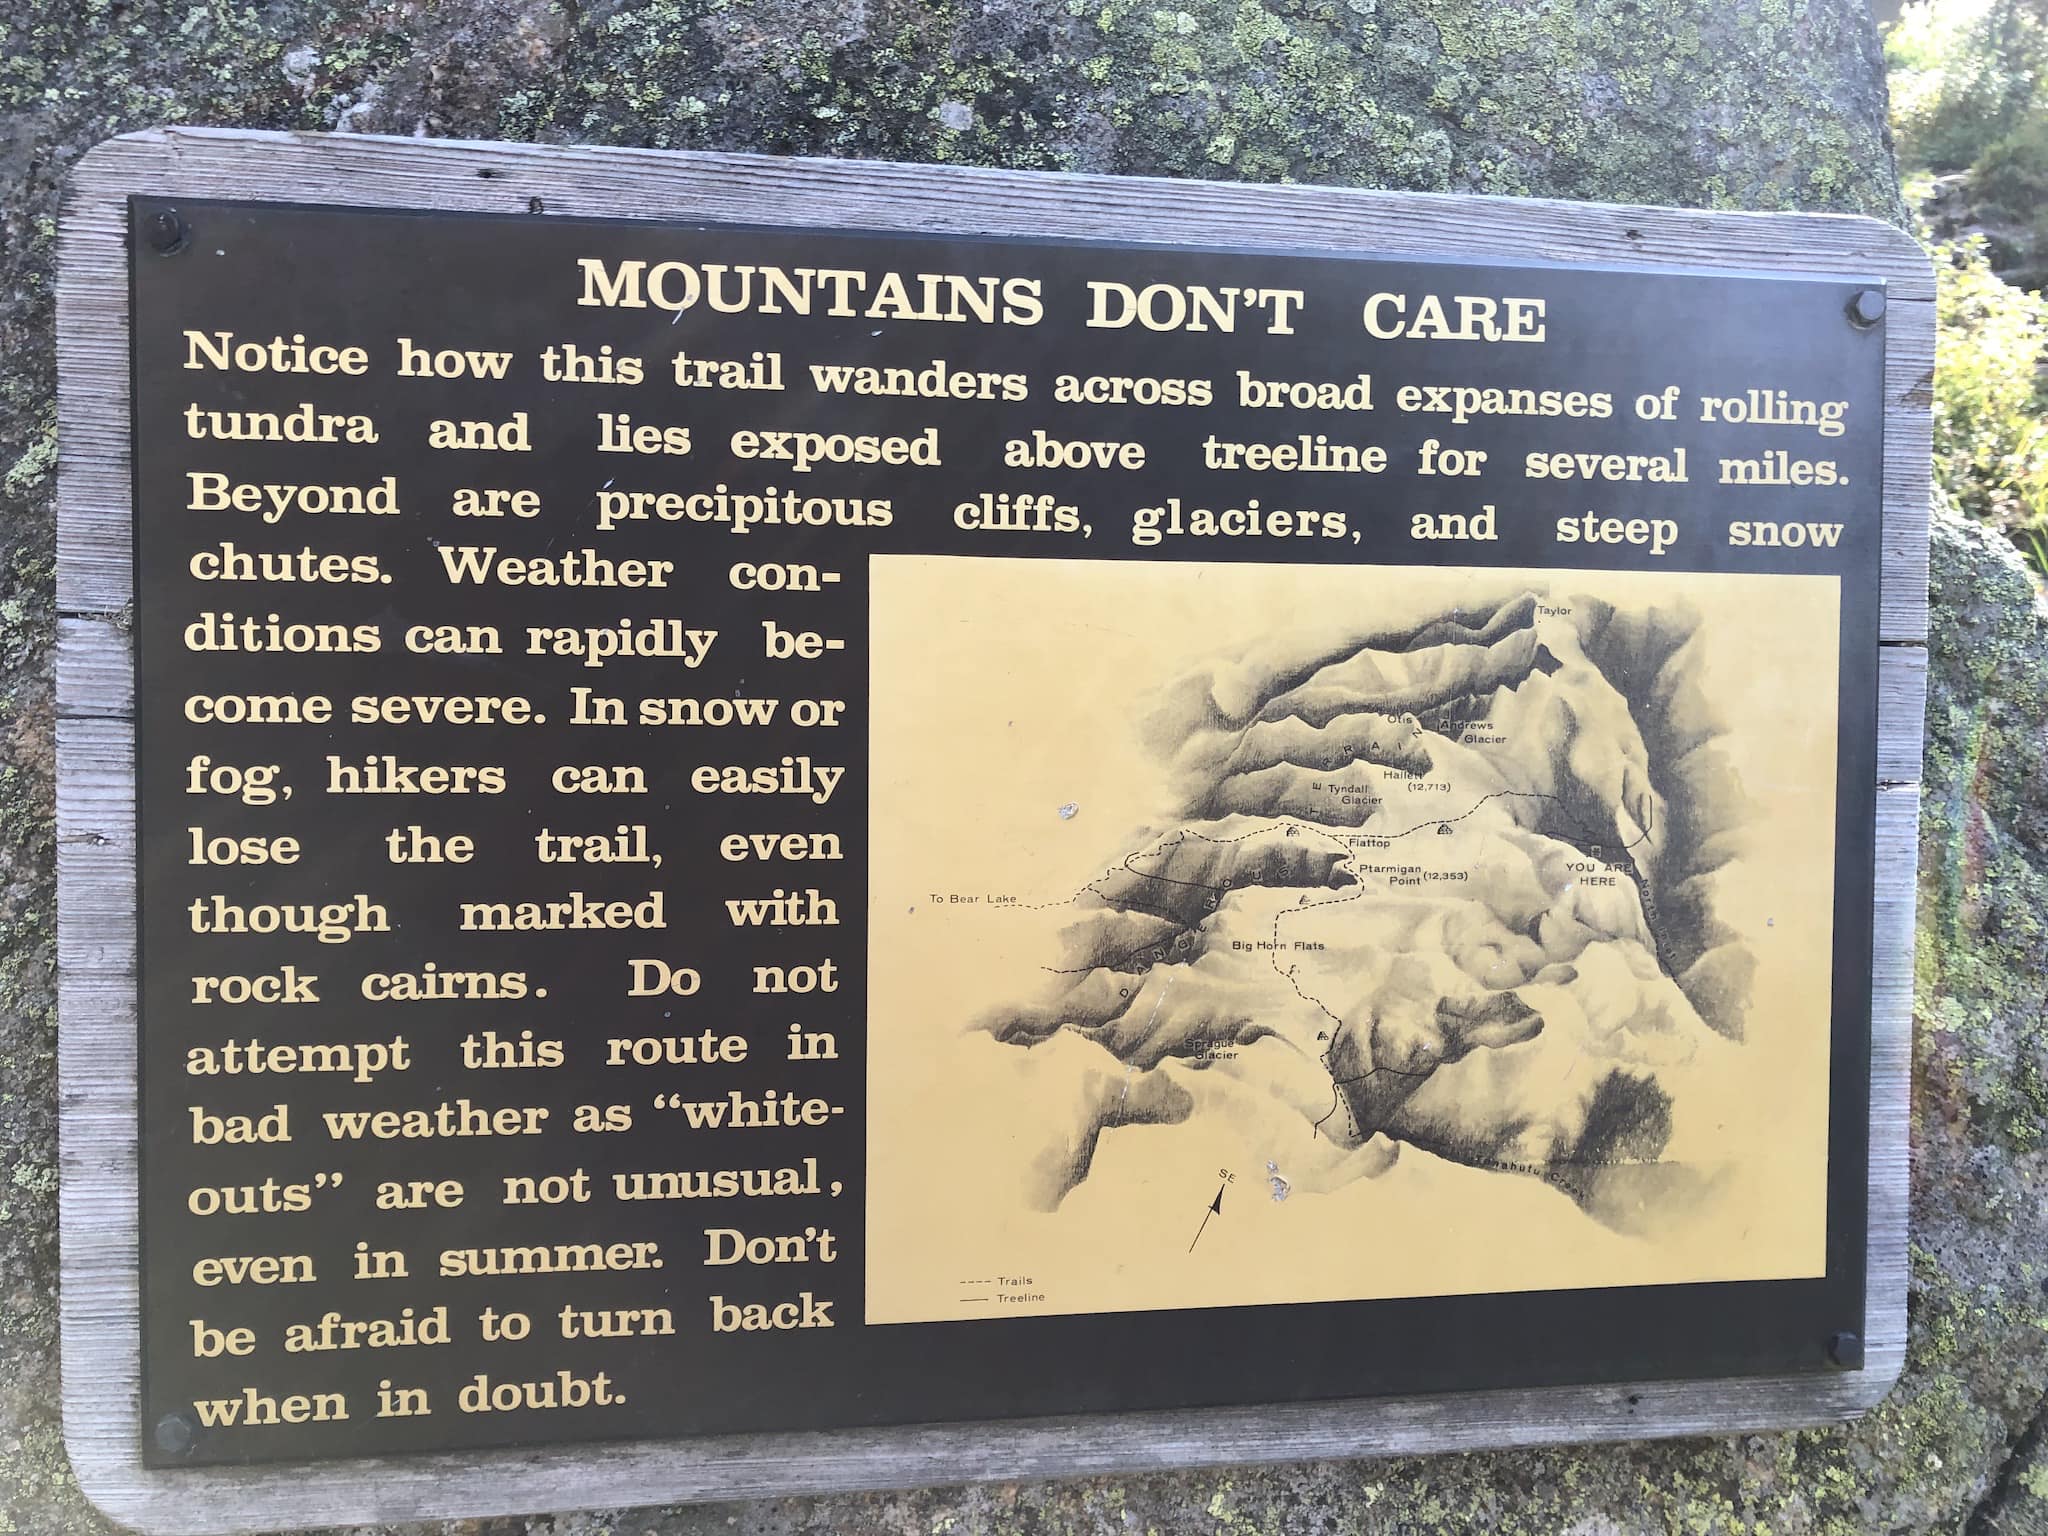 A sign warning hikers about the dangerous weather conditions ahead.